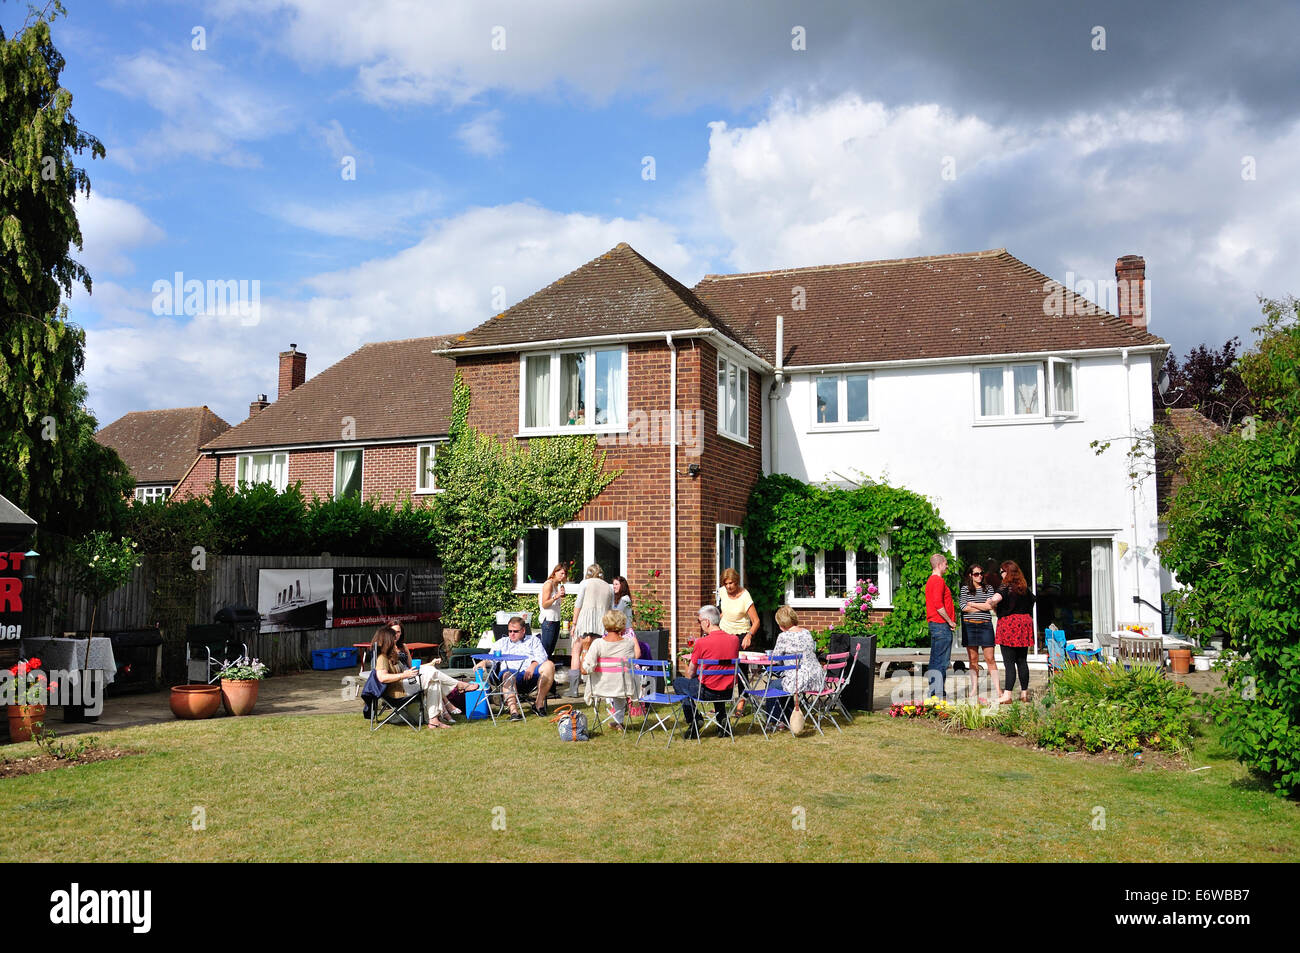 Barbecue familial dans jardin, Maidenhead, Royal Borough of Windsor and Maidenhead, Berkshire, Angleterre, Royaume-Uni Banque D'Images